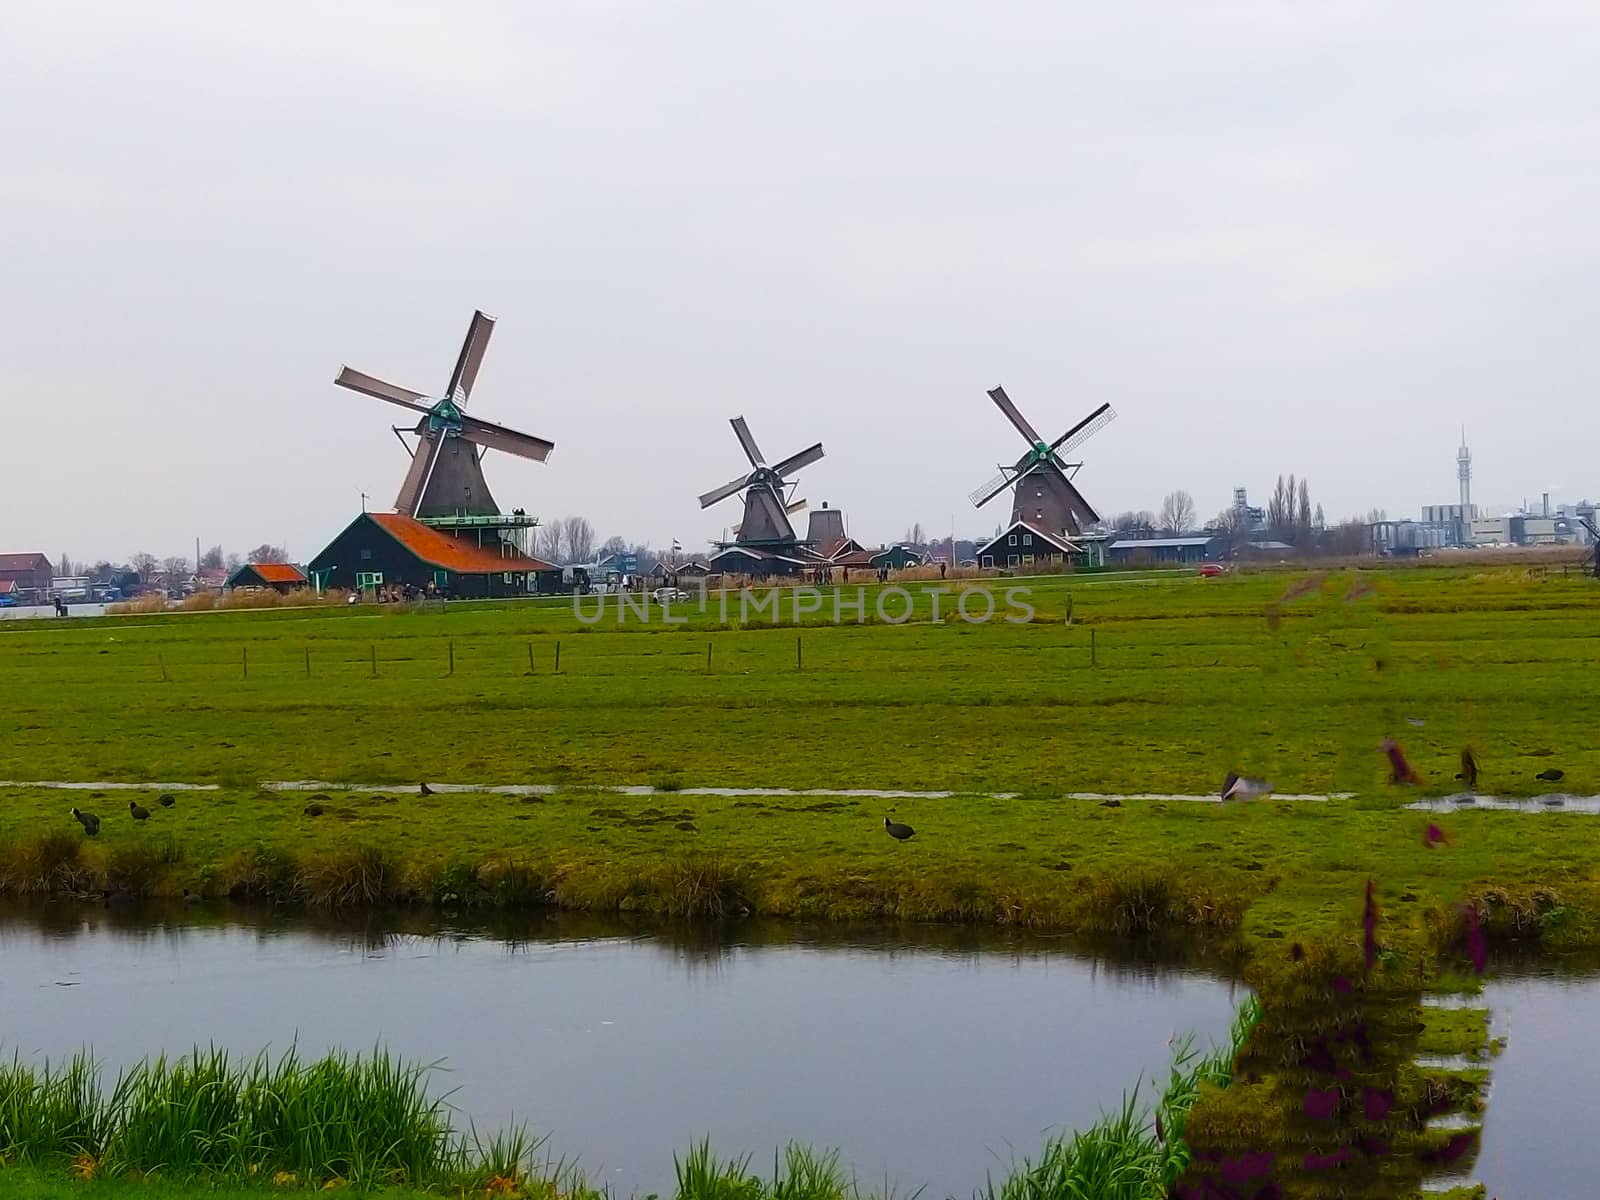 visiting a rural area in Netherlands